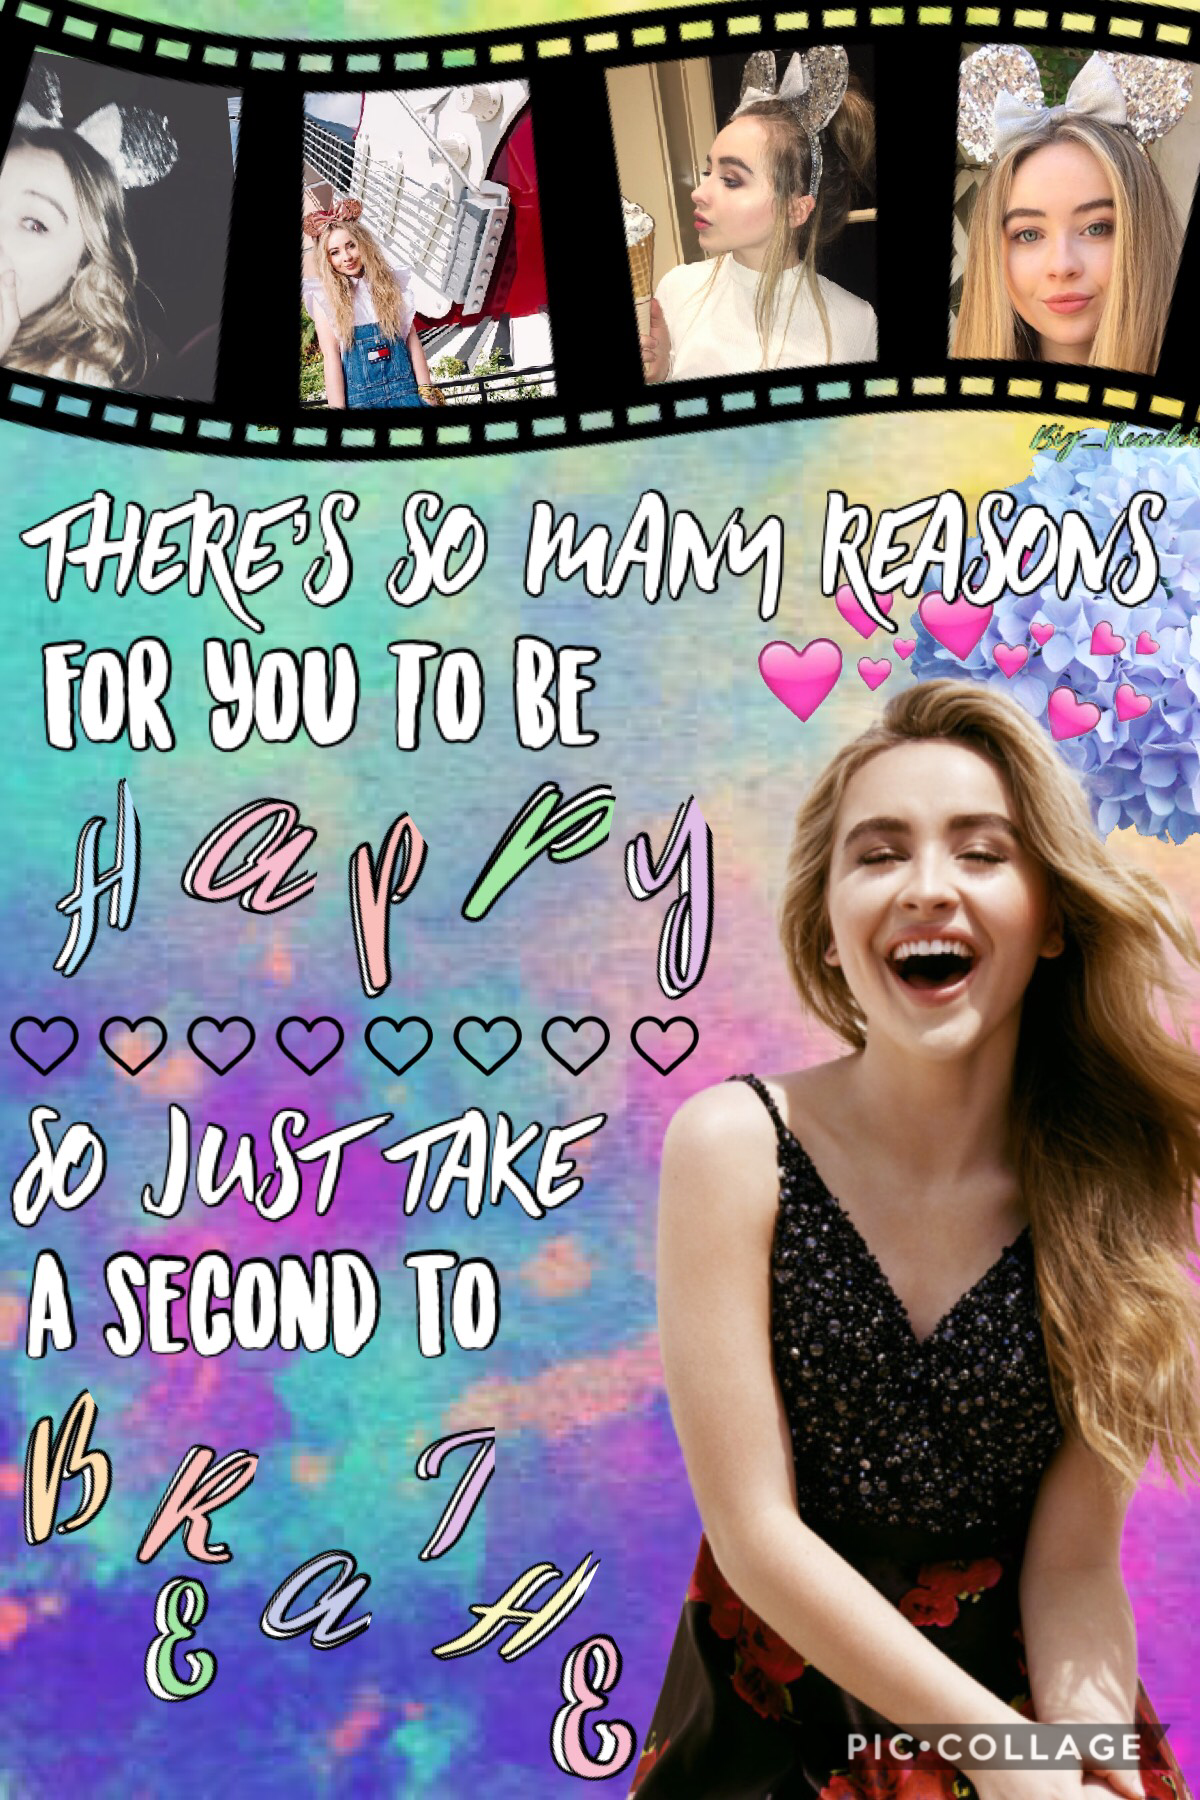 🙂”Smile” by Sabrina Carpenter🙂tap!! Hope you like this colorful simple edit💕Shoutout to MushroomCup01, she is AMAZING, very talented, and she’s my best friend here in PC! Please follow her!👍🏼😃QOTD:what Sabrina song do you want to see next?